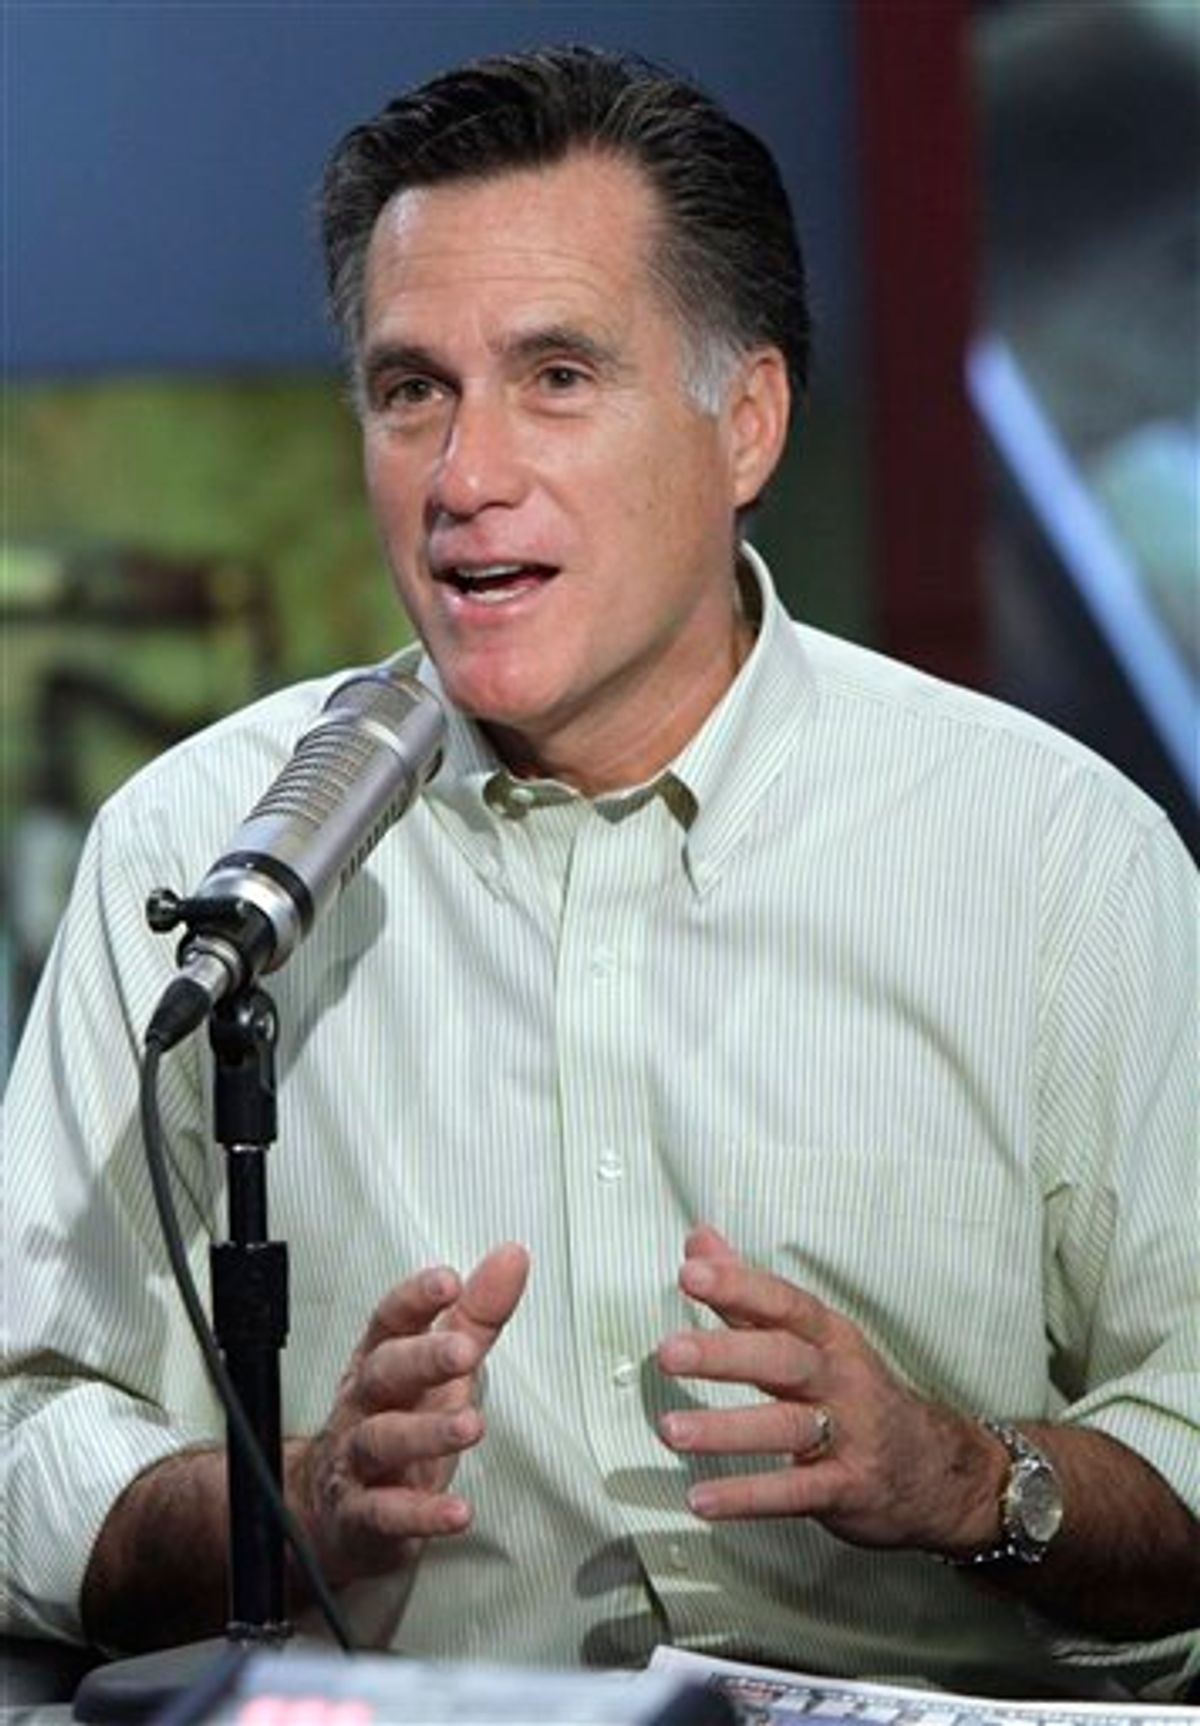 FILE - In this Feb. 2, 2011 file photo, former Massachusetts Gov. Mitt Romney is interviewed in New York. The tea party movement is mixing a strange political brew in famously independent New Hampshire, complicating the first-in-the-nation primary strategy for the growing number of potential Republican presidential hopefuls.  (AP Photo/Richard Drew, File) (AP)